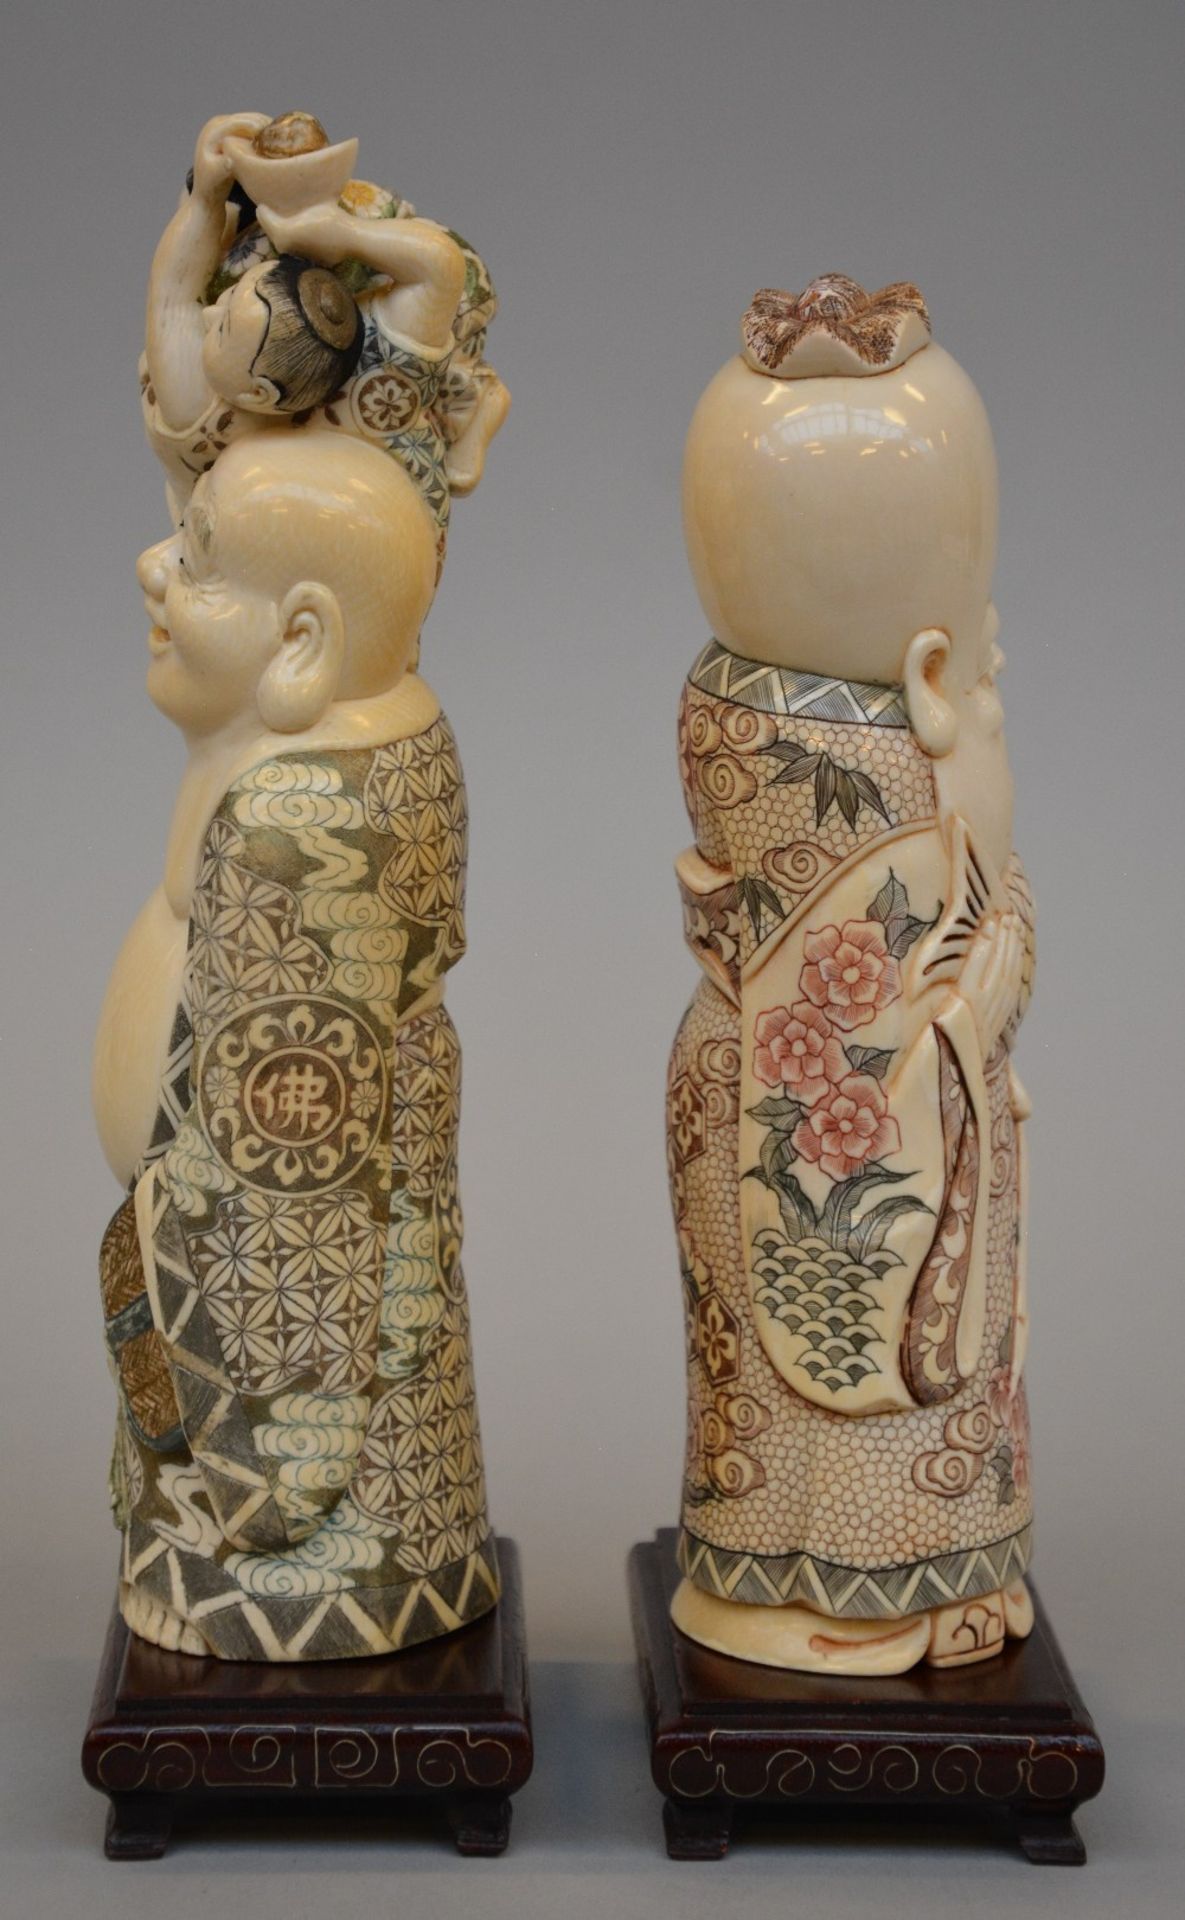 Two Japanese ivory figures on a wooden base depicting the laughing Hotei and Fukurokuju, scrimshaw - Image 4 of 6